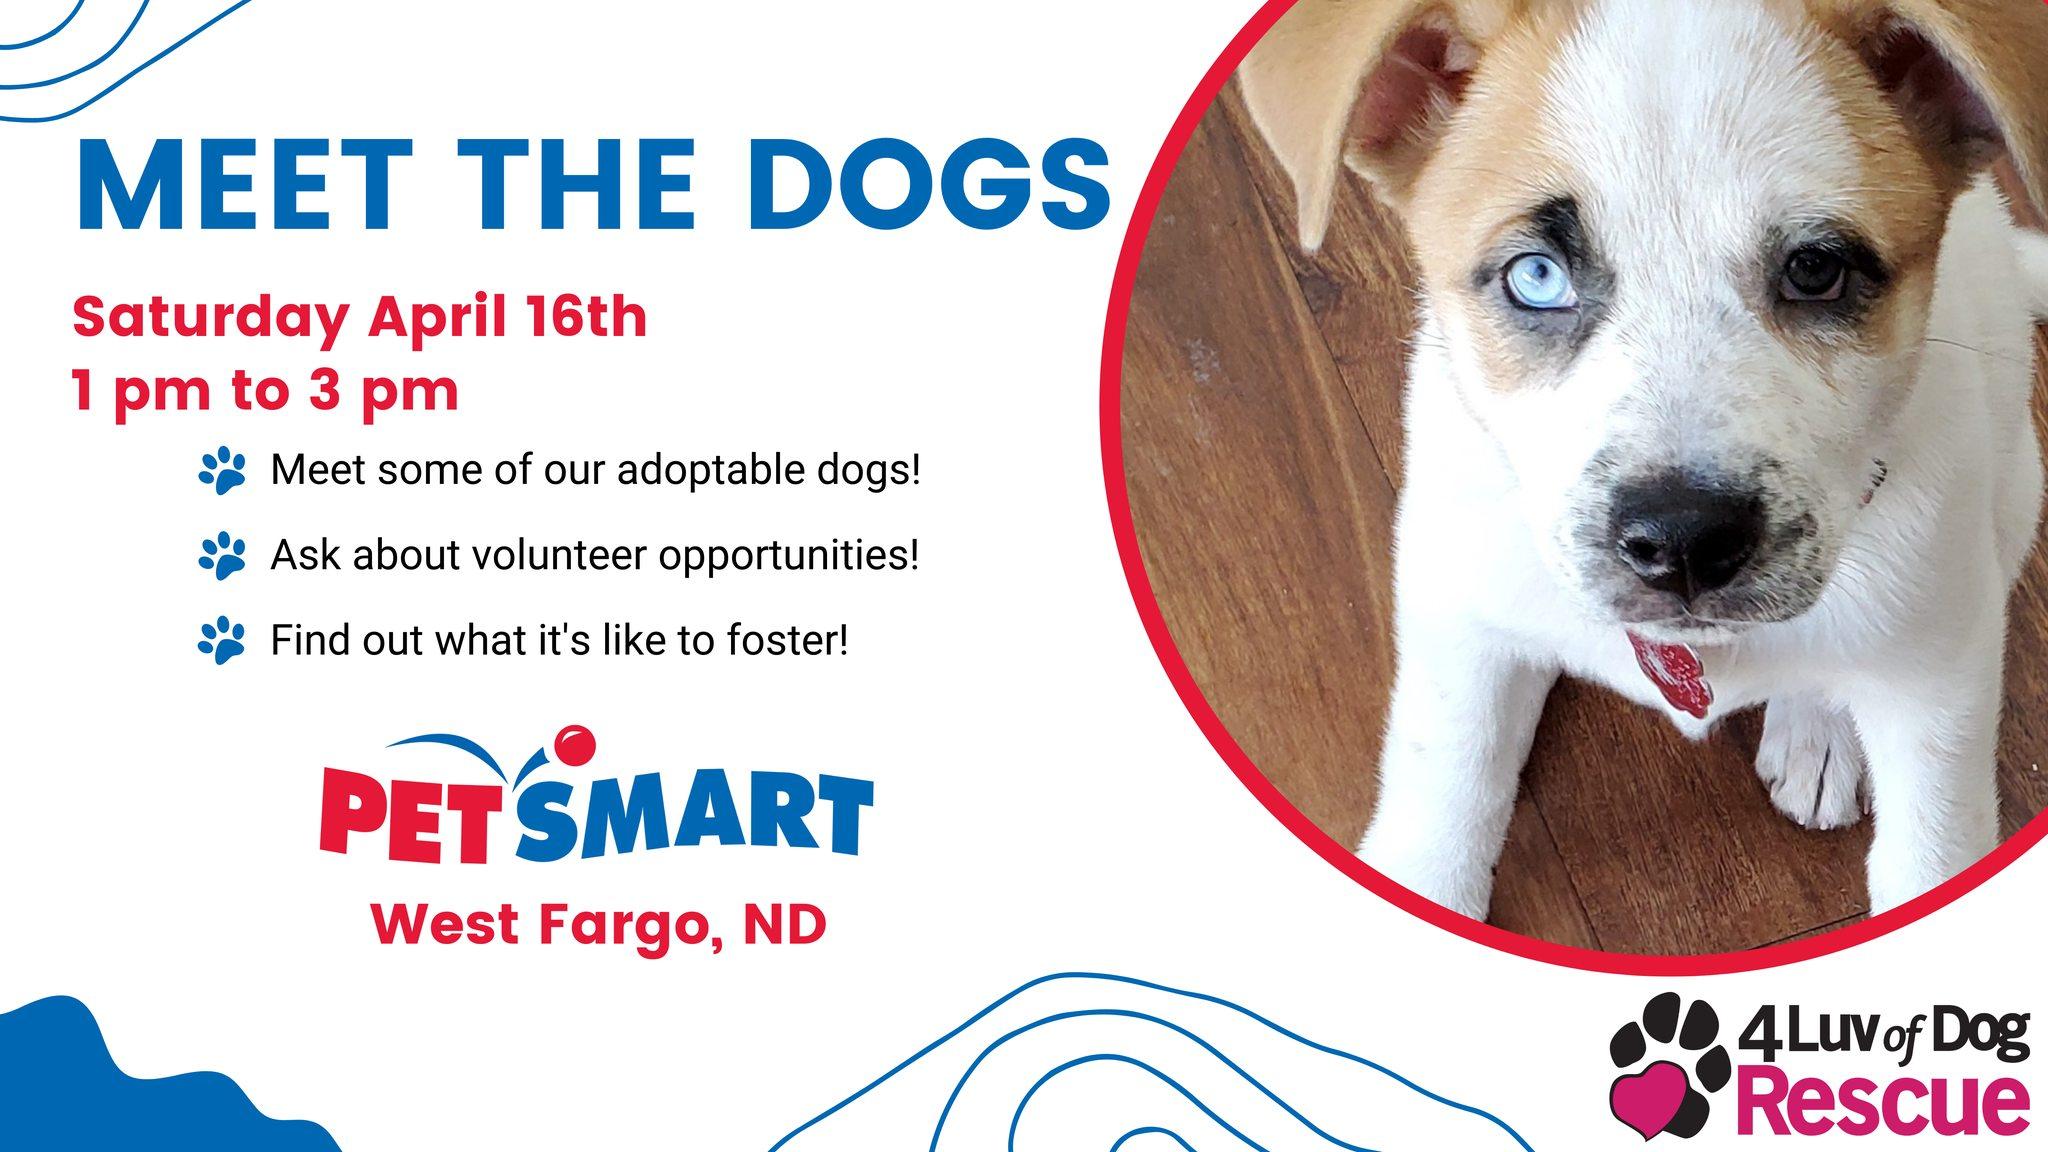 4 Luv of Dog Rescue Meet the Dogs Event - April 16, 2022